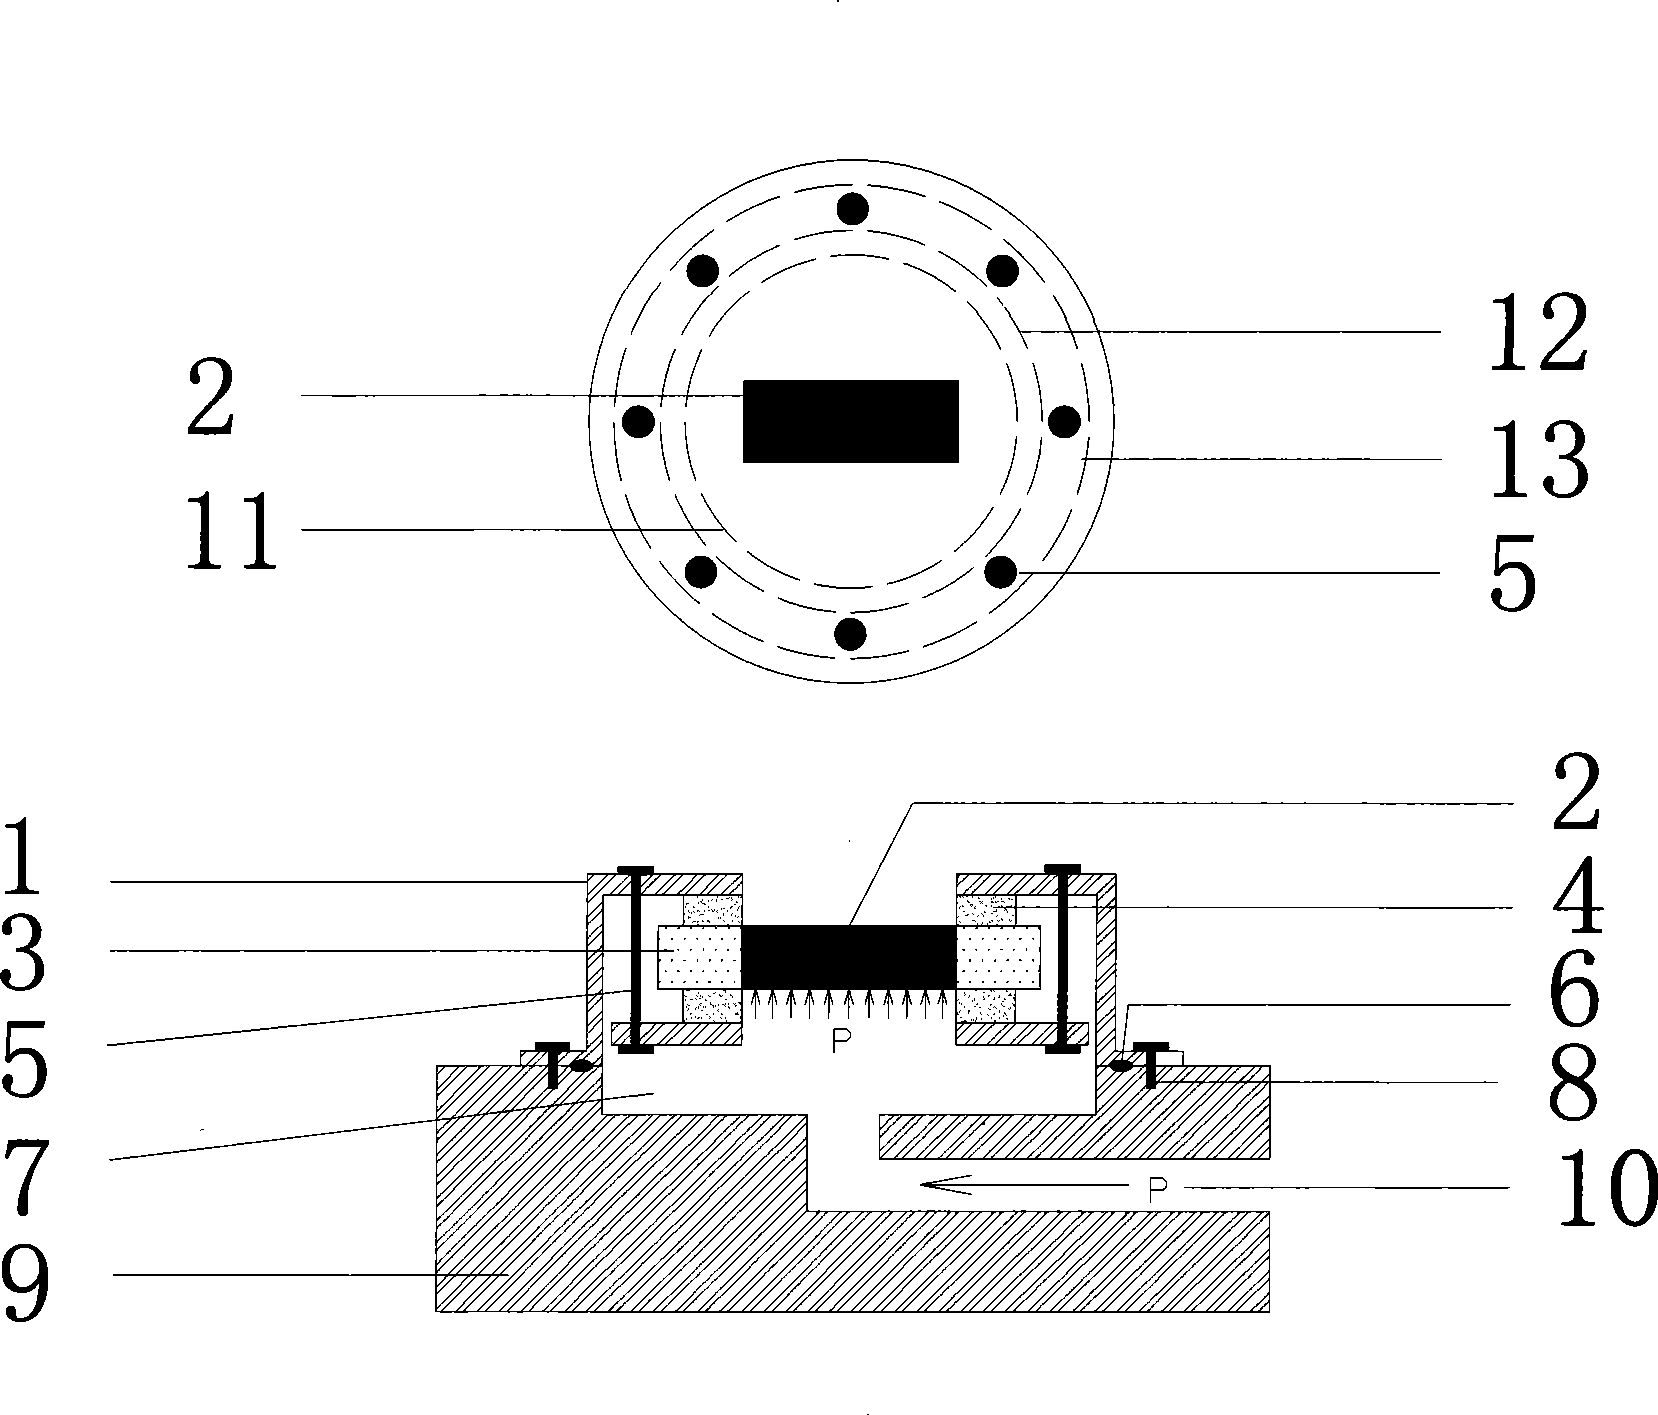 Test method for anti-permeability performance of fluid sealant and substrate bonding sample interface